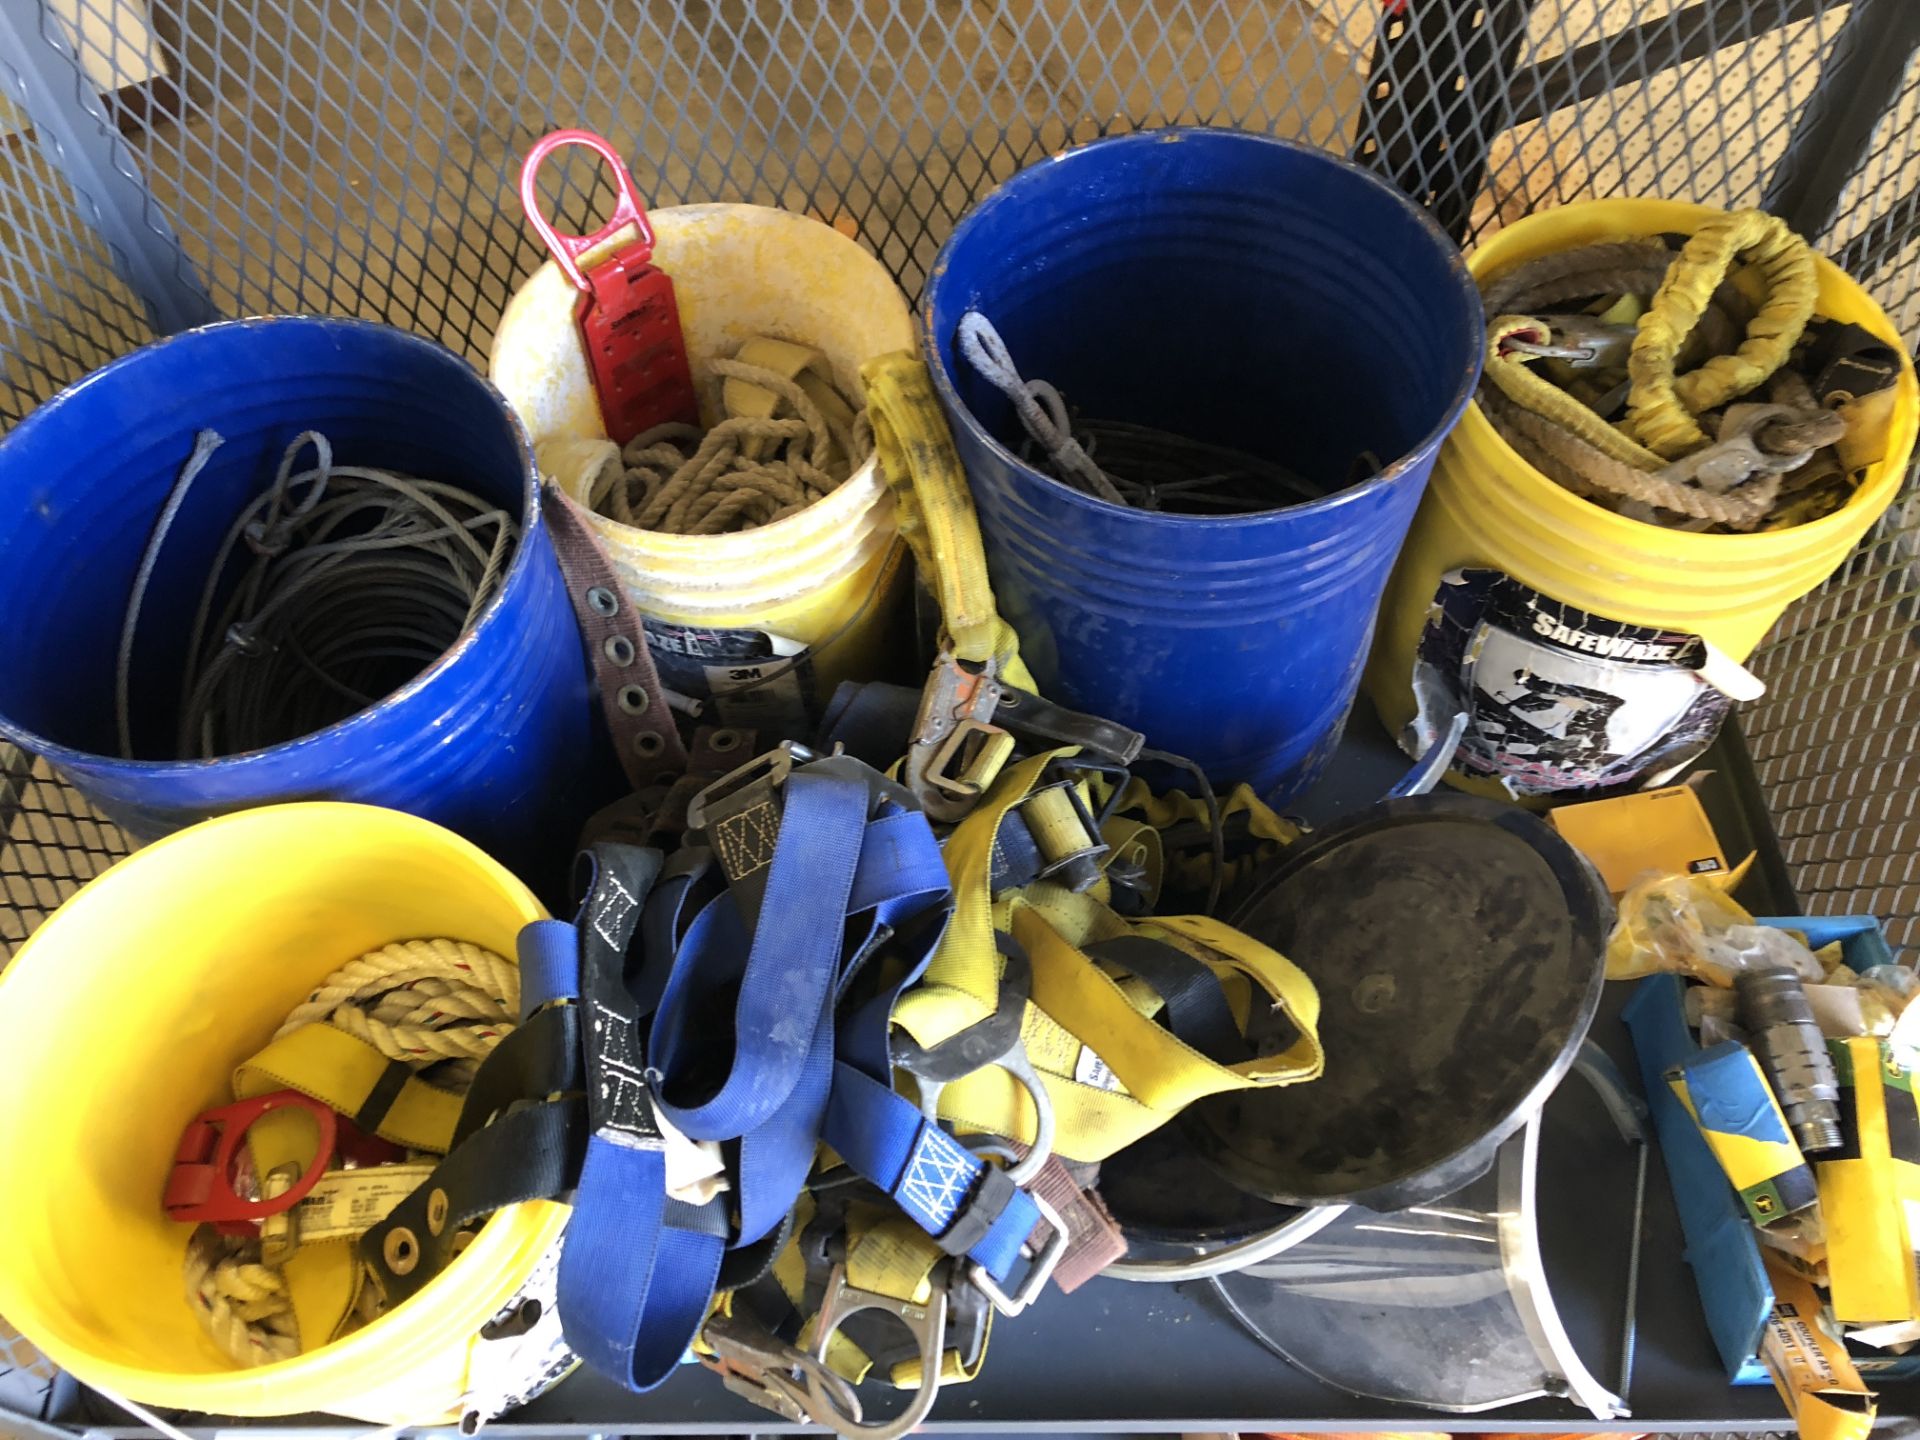 CONTENTS OF TOP SHELF INCLUDING SAFETY HARNESSES; ROPE; CABLE; JOHN DEERE COMPONENTS & MORE